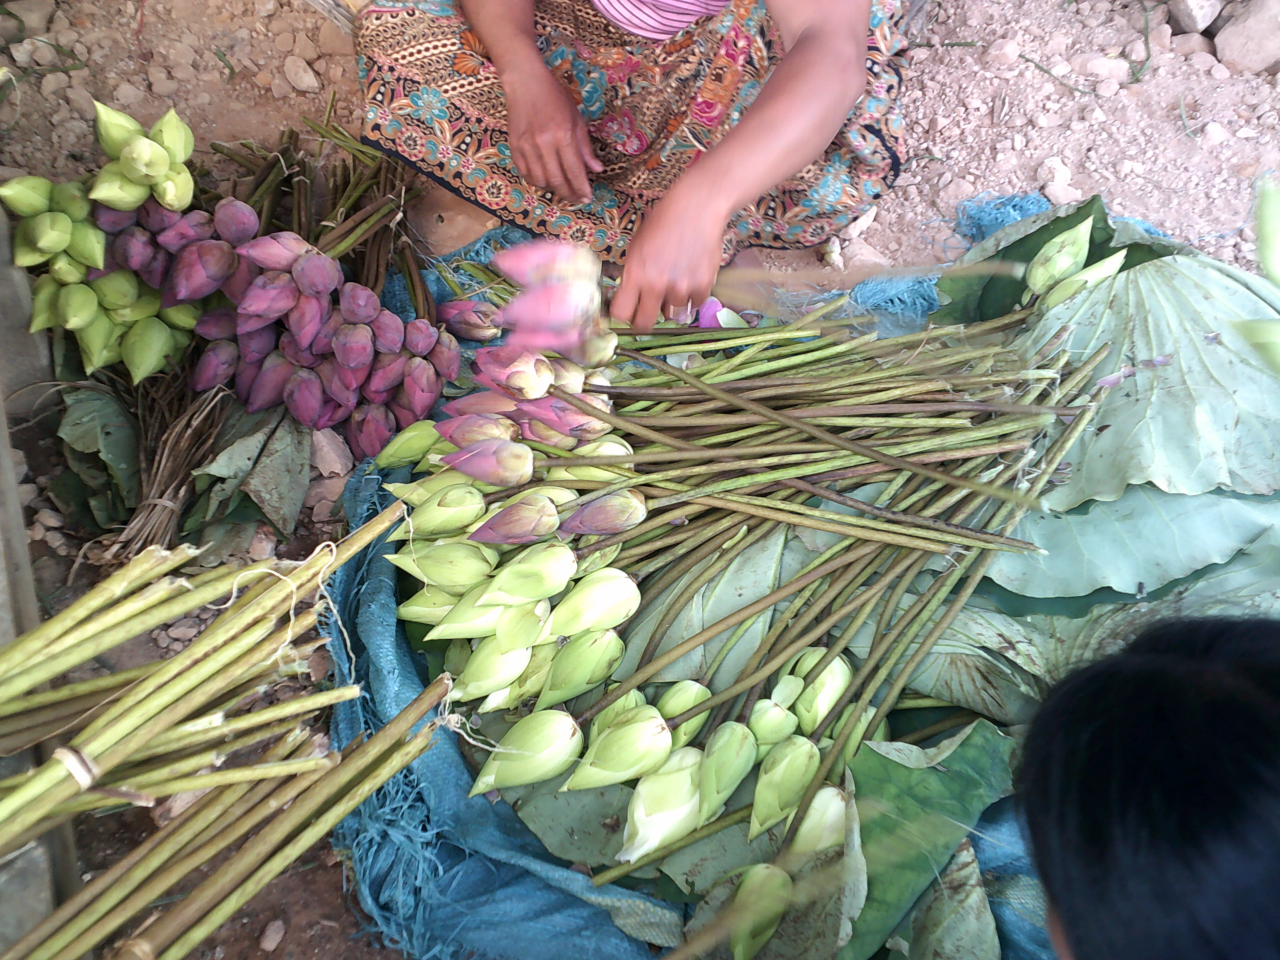 Lotus flowers on a market stand